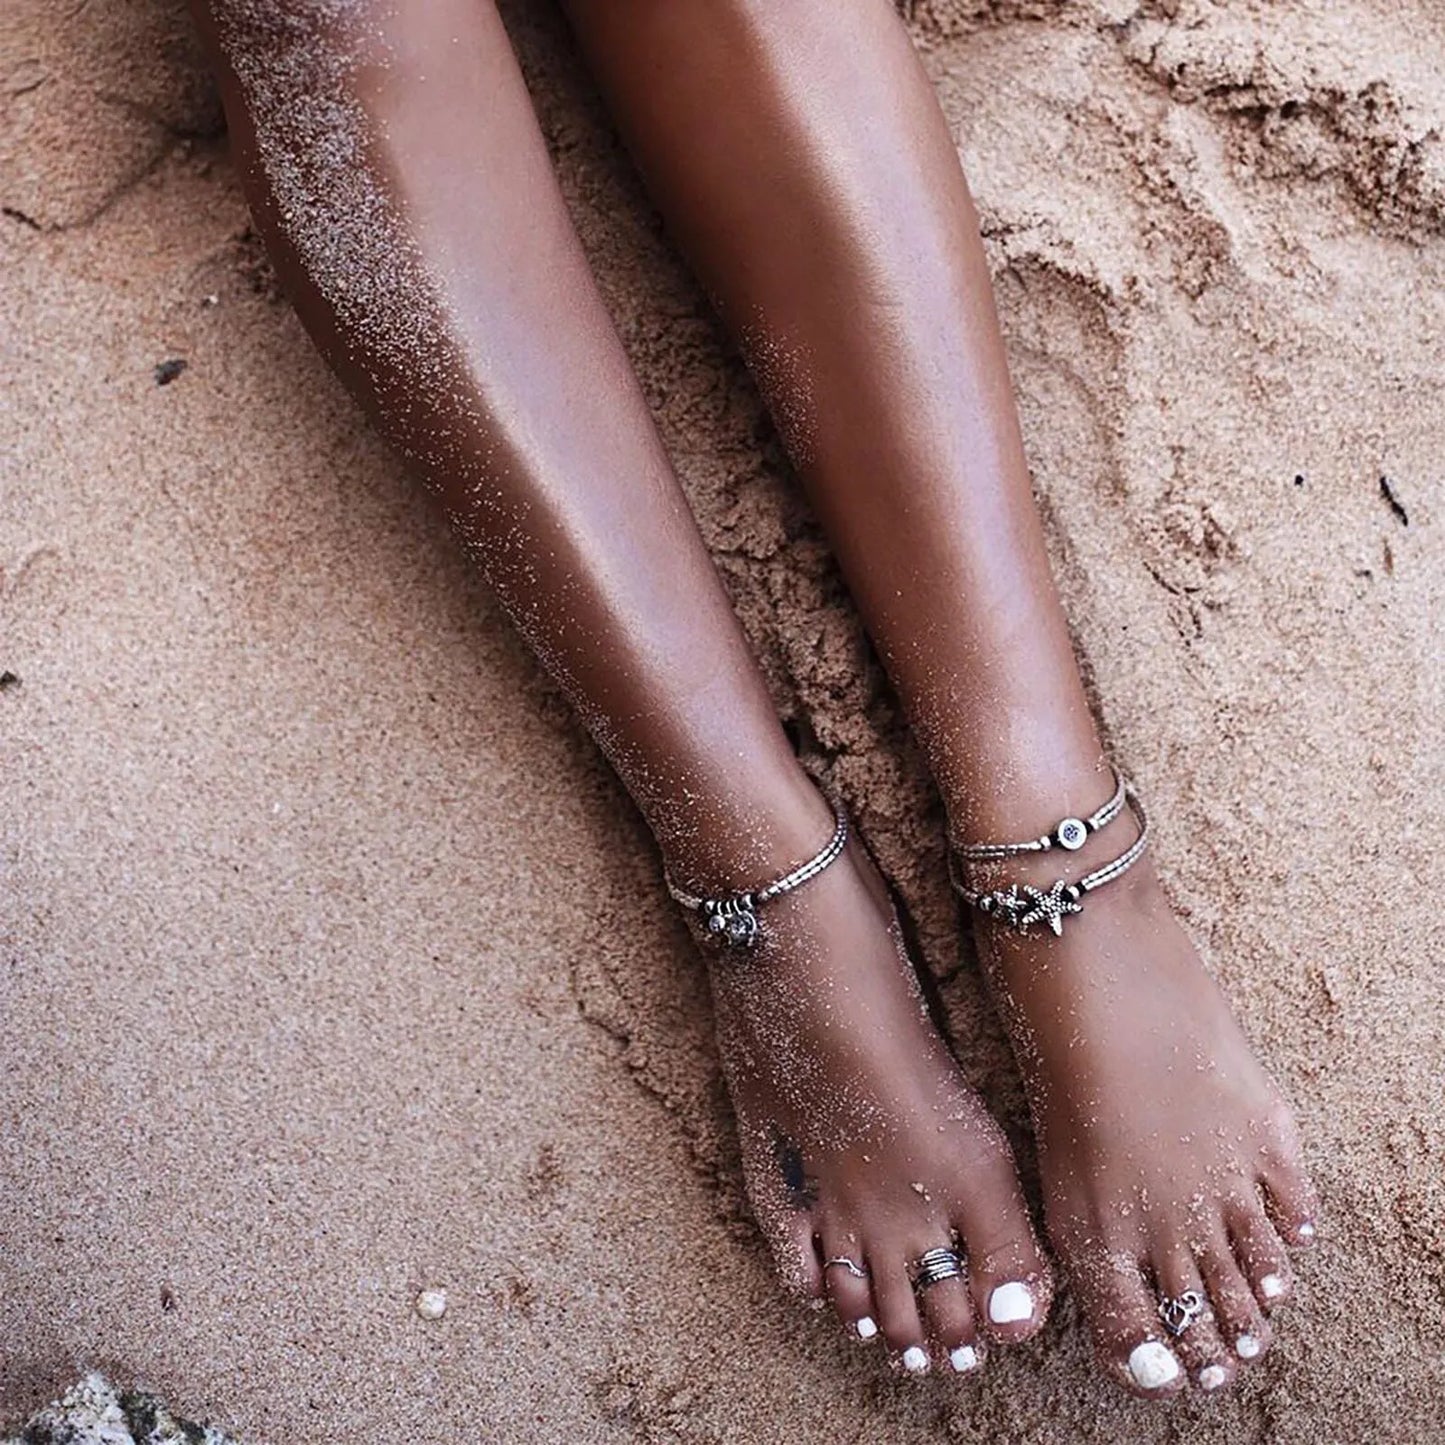 Vintage Handmade Beads Chain Anklets